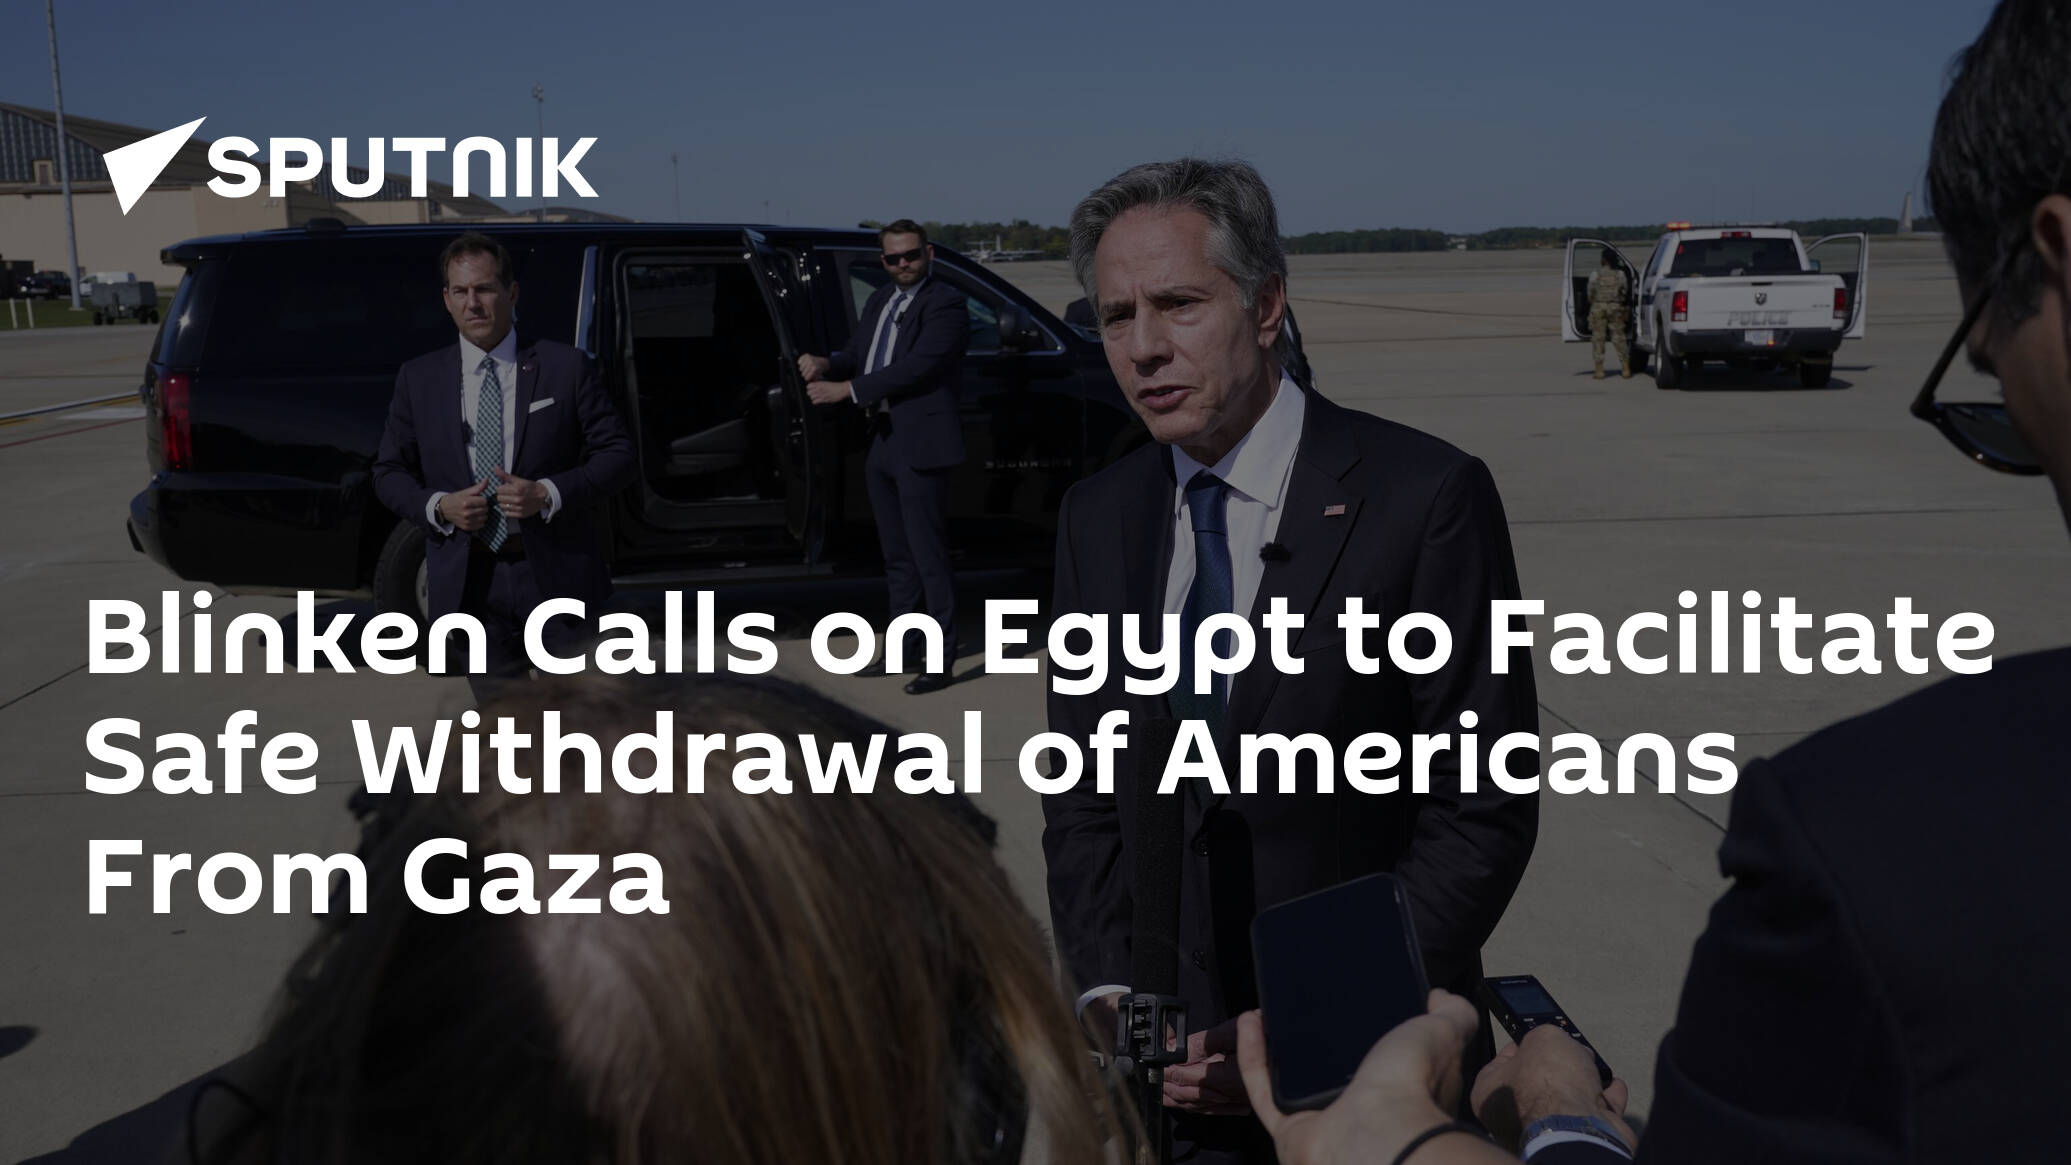 Blinken Calls on Egypt to Facilitate Safe Withdrawal of Americans From Gaza